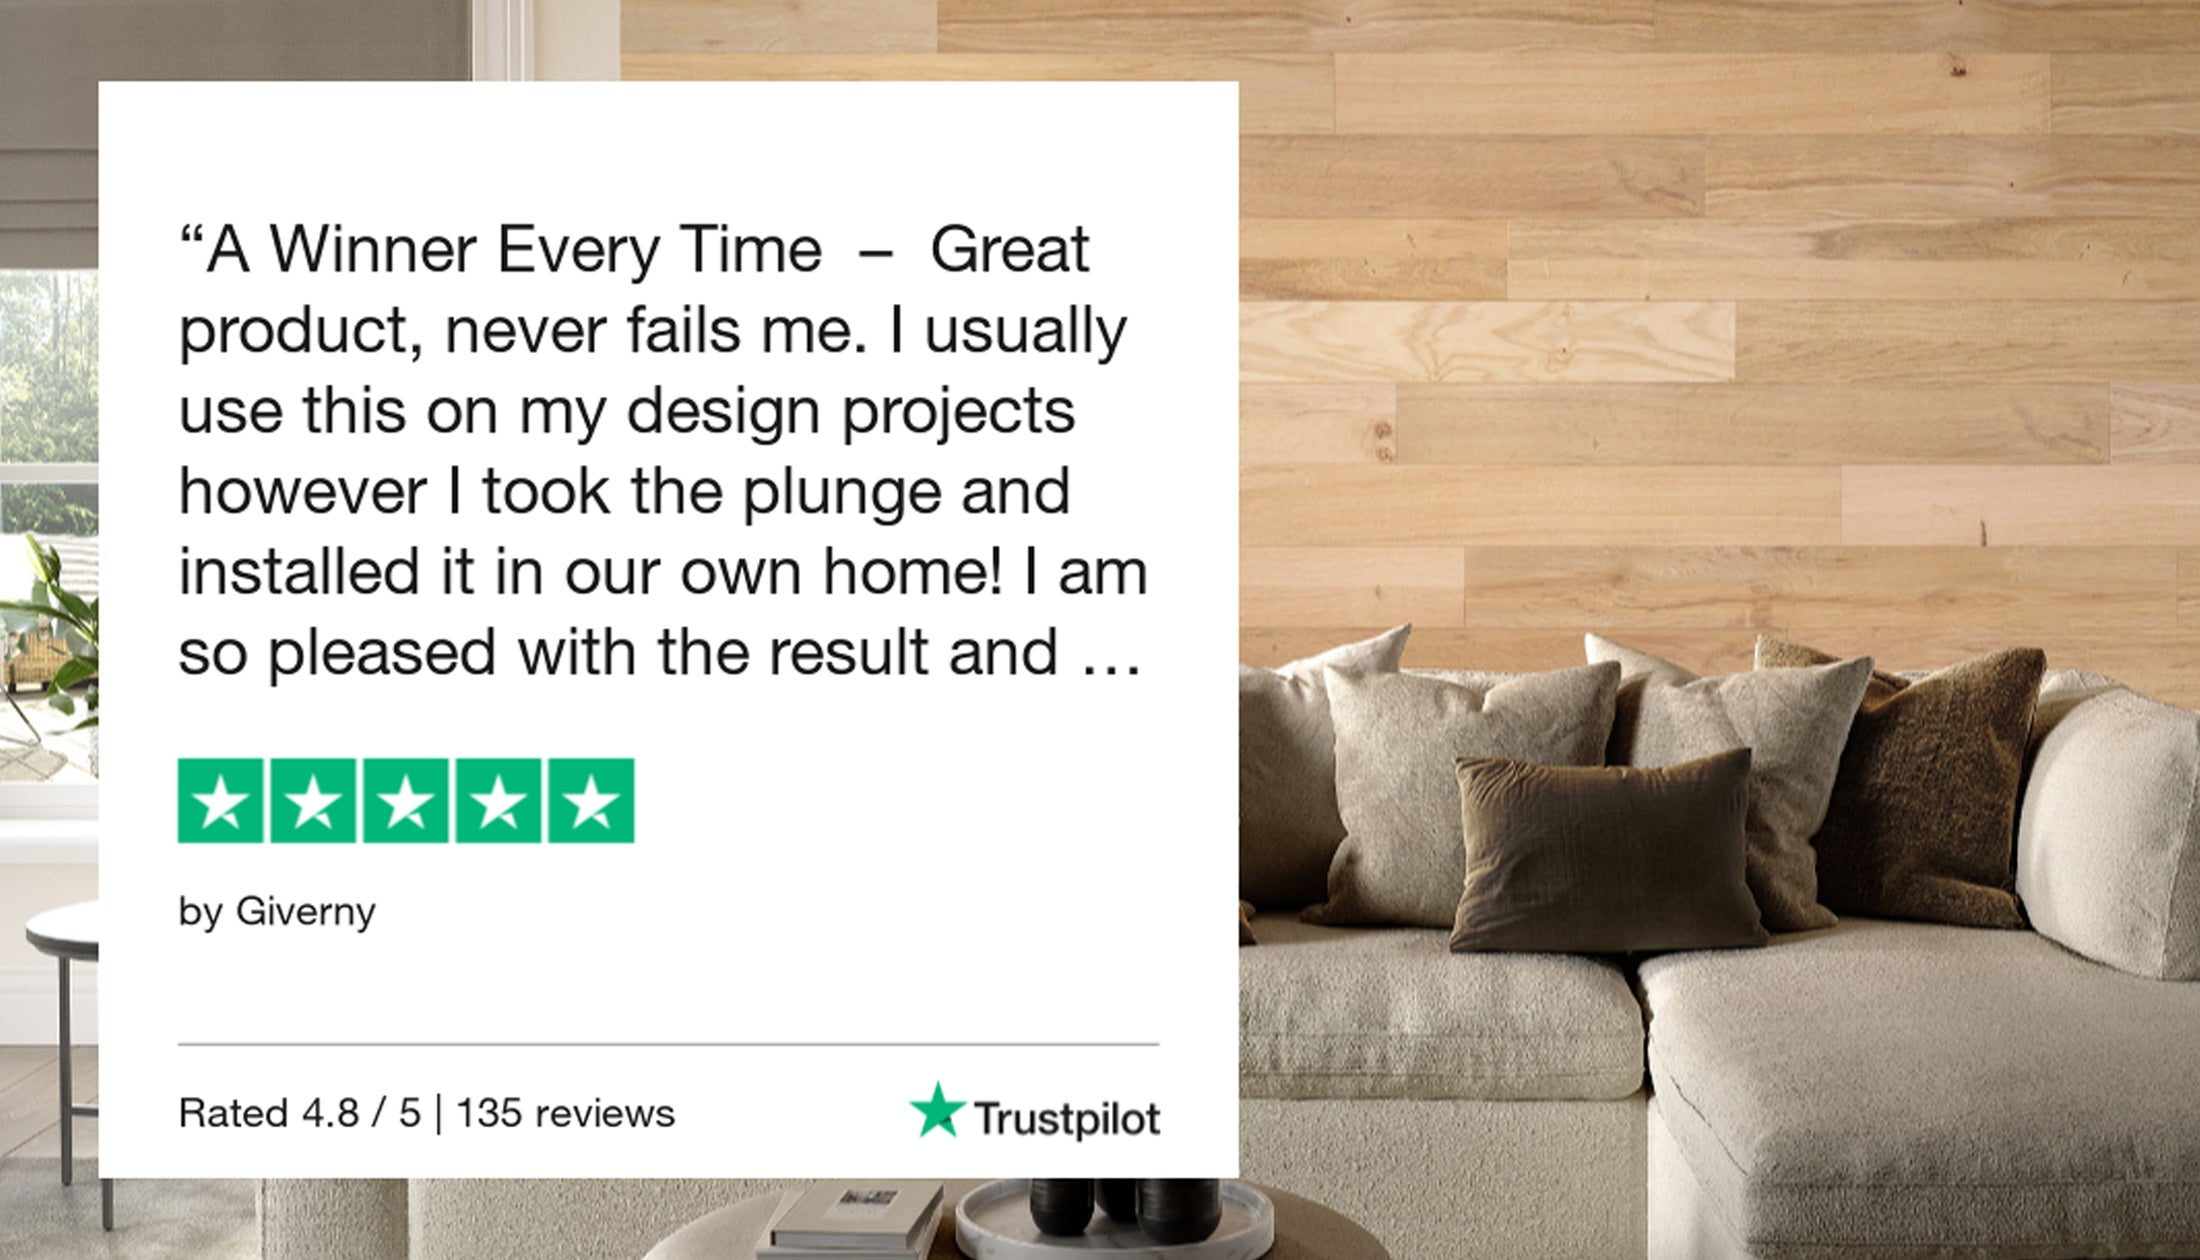 "A winner every time - great product, never fails me. I usually use this on my design projects however I took th eplunge and installed it in our own home! I am so please with the result and..." 5 star review from Giverny